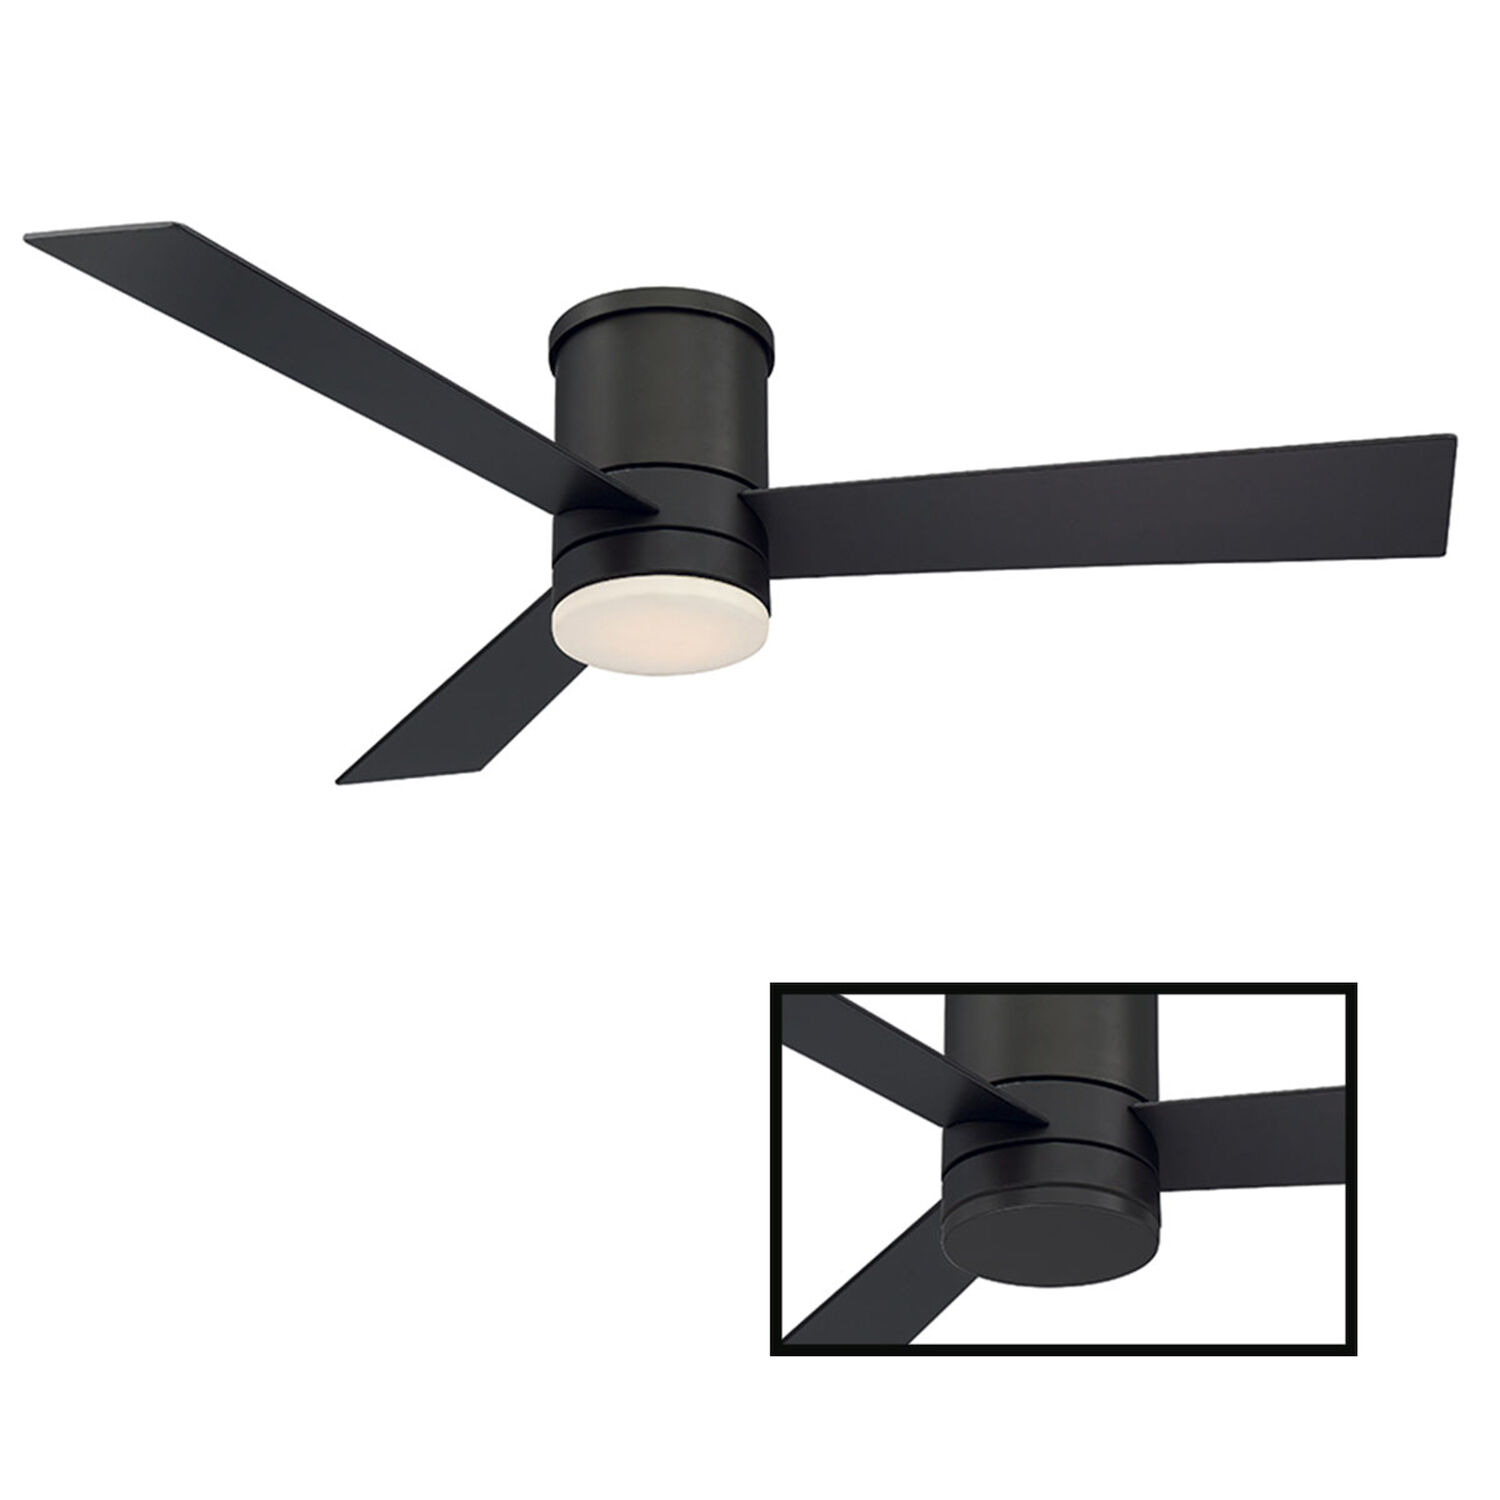 Modern Forms Axis 52 Inch Flush Mount Ceiling Fan Fh W1803 52l Bz Robinson - What Are Flush Mount Ceiling Fans